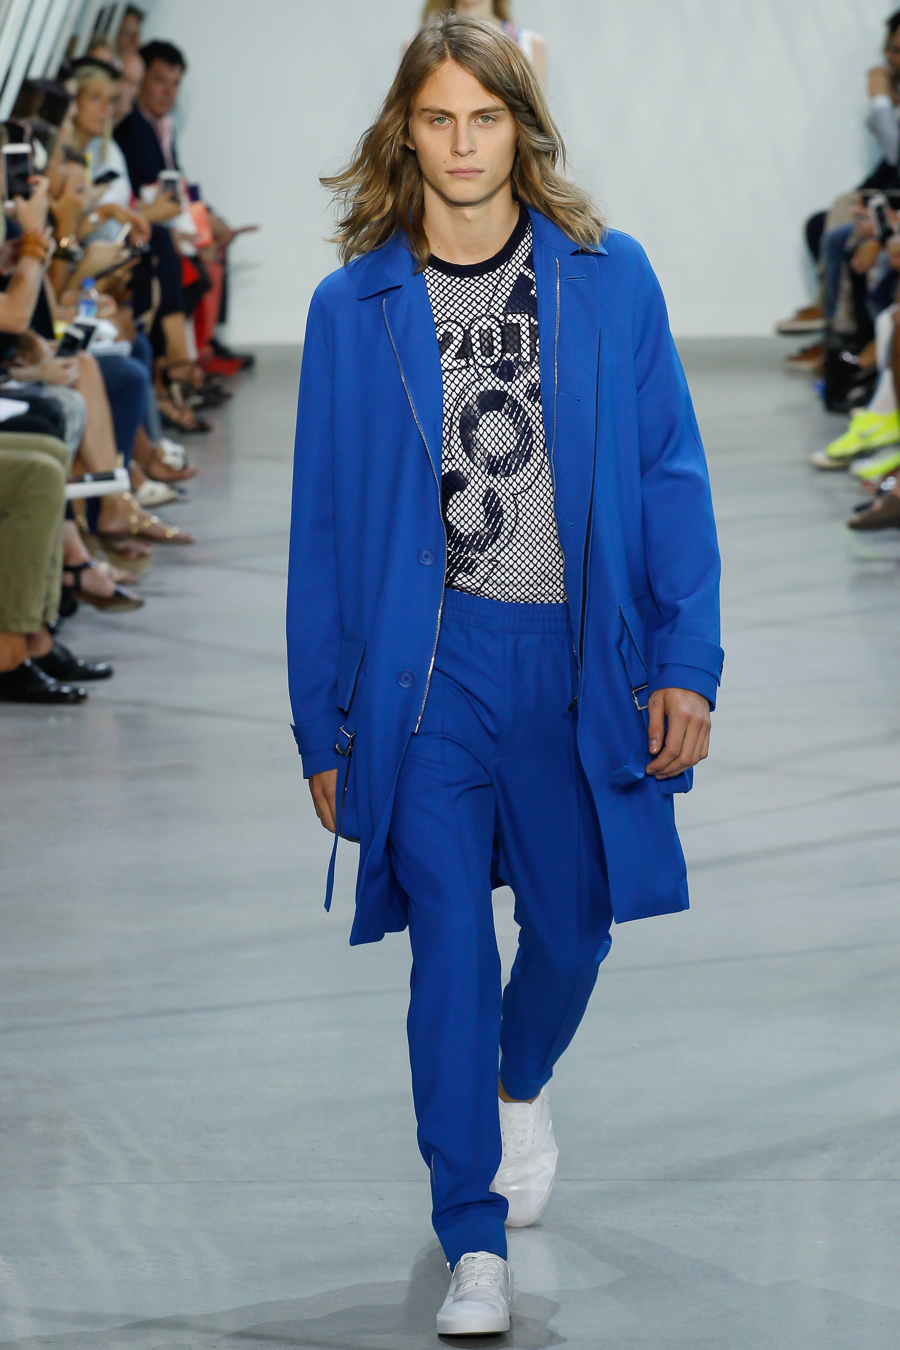 Lacoste Spring Summer 2016 Menswear Collection New York Fashion Week 008